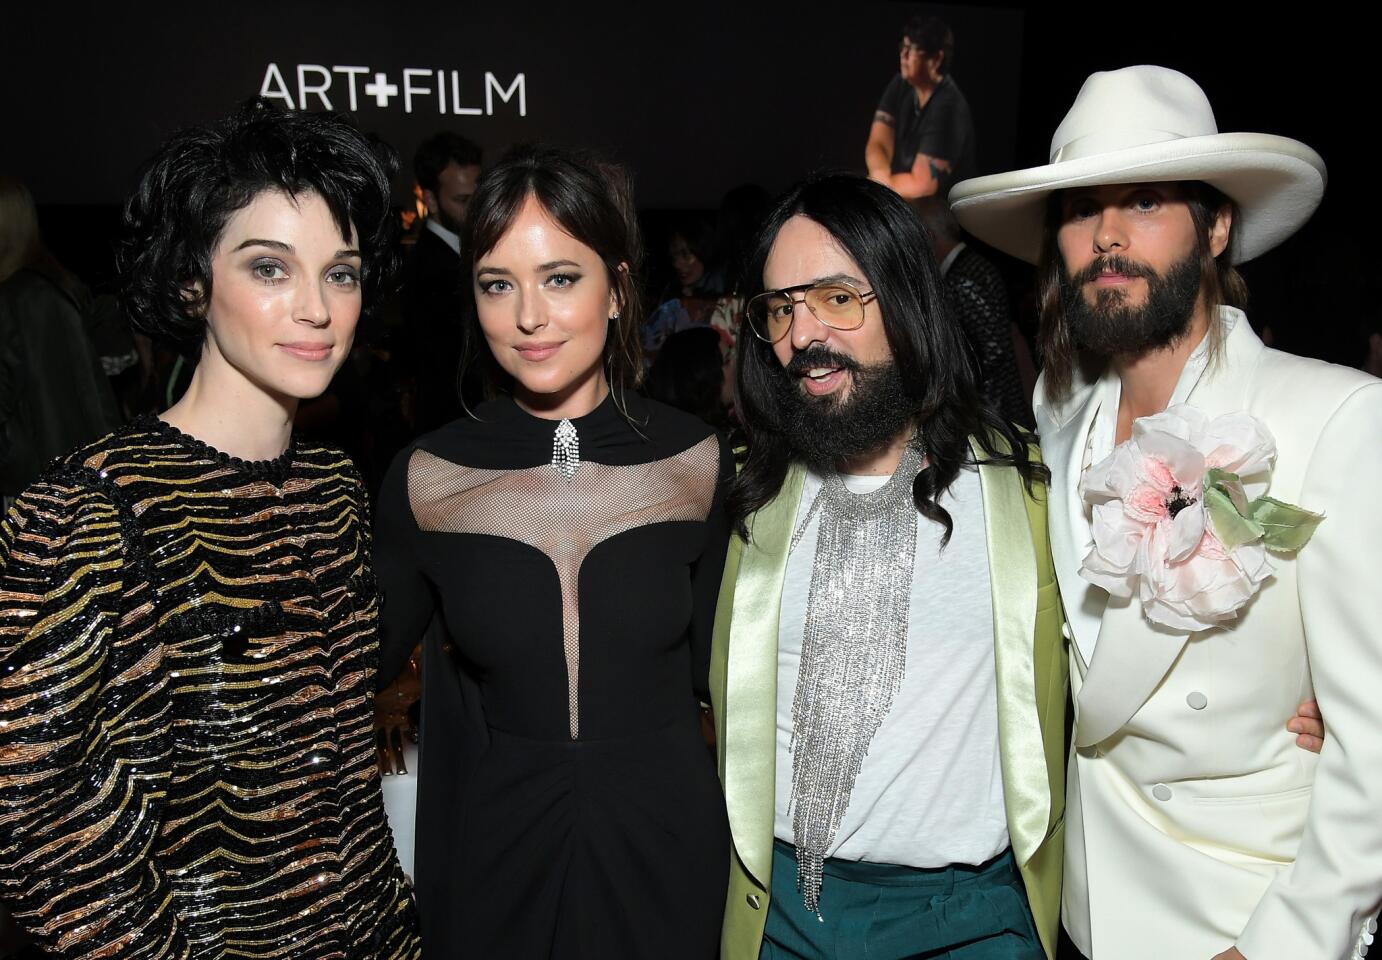 St. Vincent, from left, Dakota Johnson, Gucci Creative Director Alessandro Michele and Jared Leto -- all in Gucci -- at the 2018 LACMA Art+Film Gala honoring Catherine Opie and Guillermo del Toro on Nov. 3.